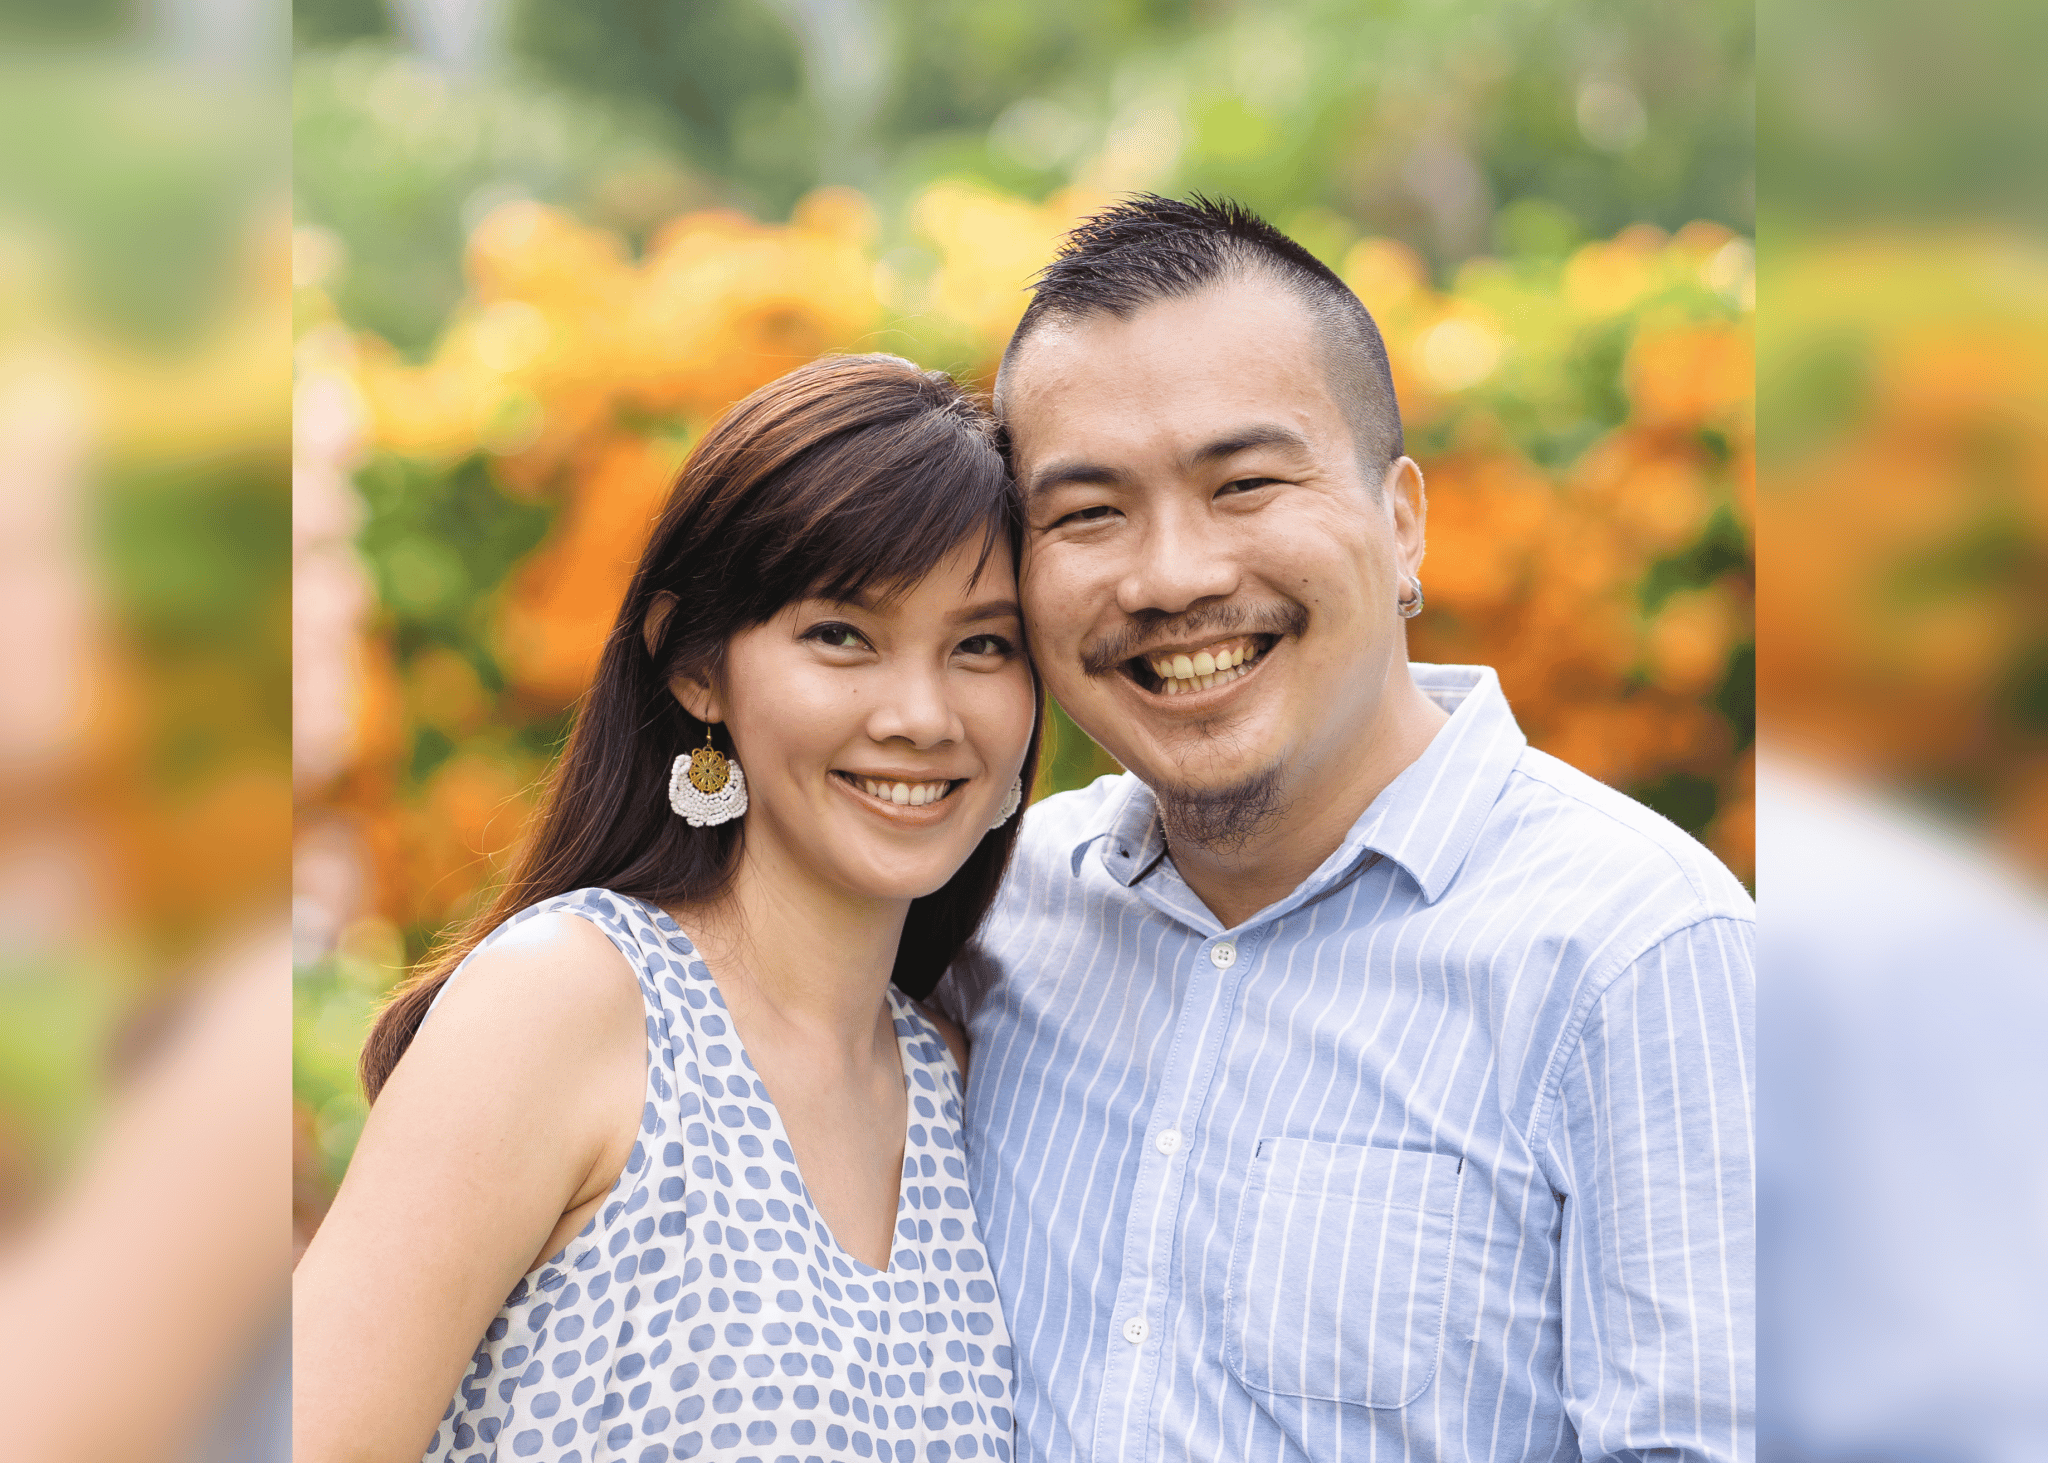 The acknowledgement of God’s goodness and guidance has been the hallmark of Aaron and Chrystin’s faith and business journey. All photos courtesy of Aaron and Chrystin.